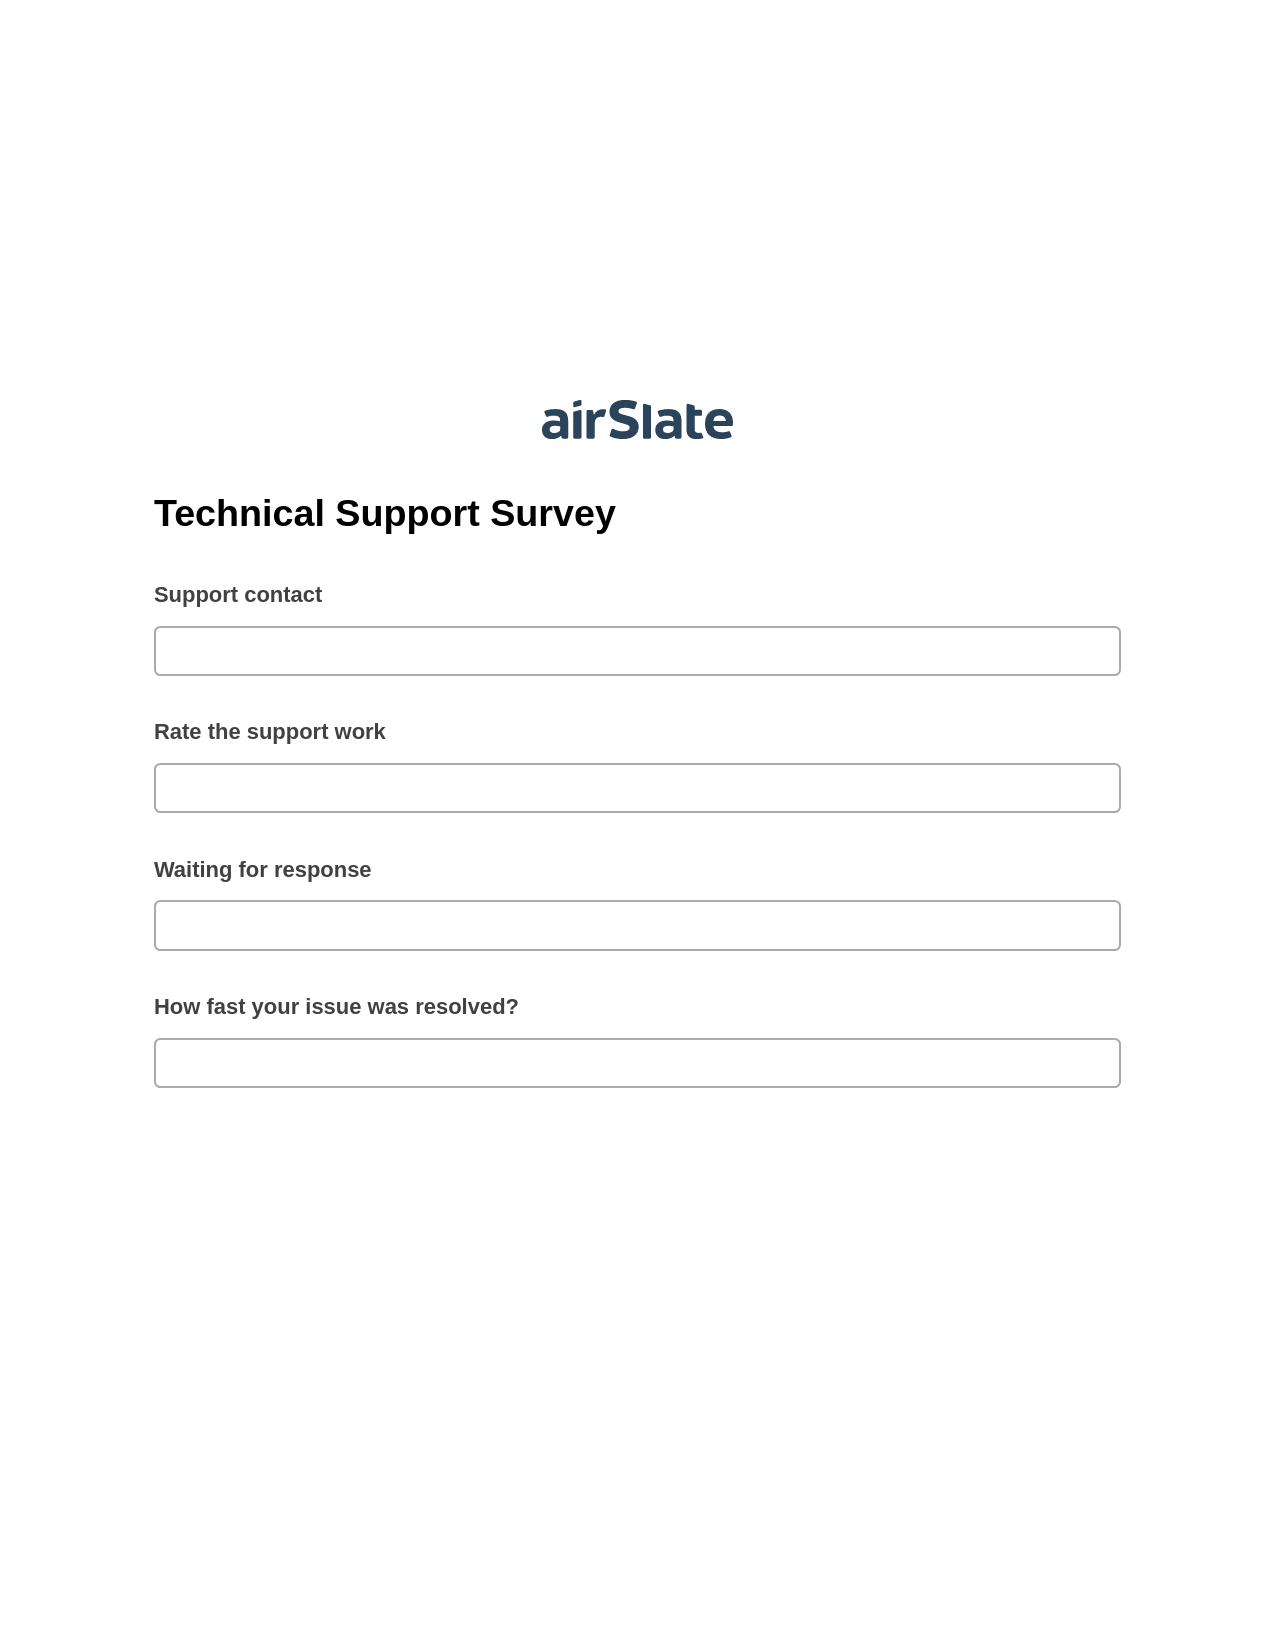 Technical Support Survey Pre-fill from another Slate Bot, Jira Bot, Export to Excel 365 Bot